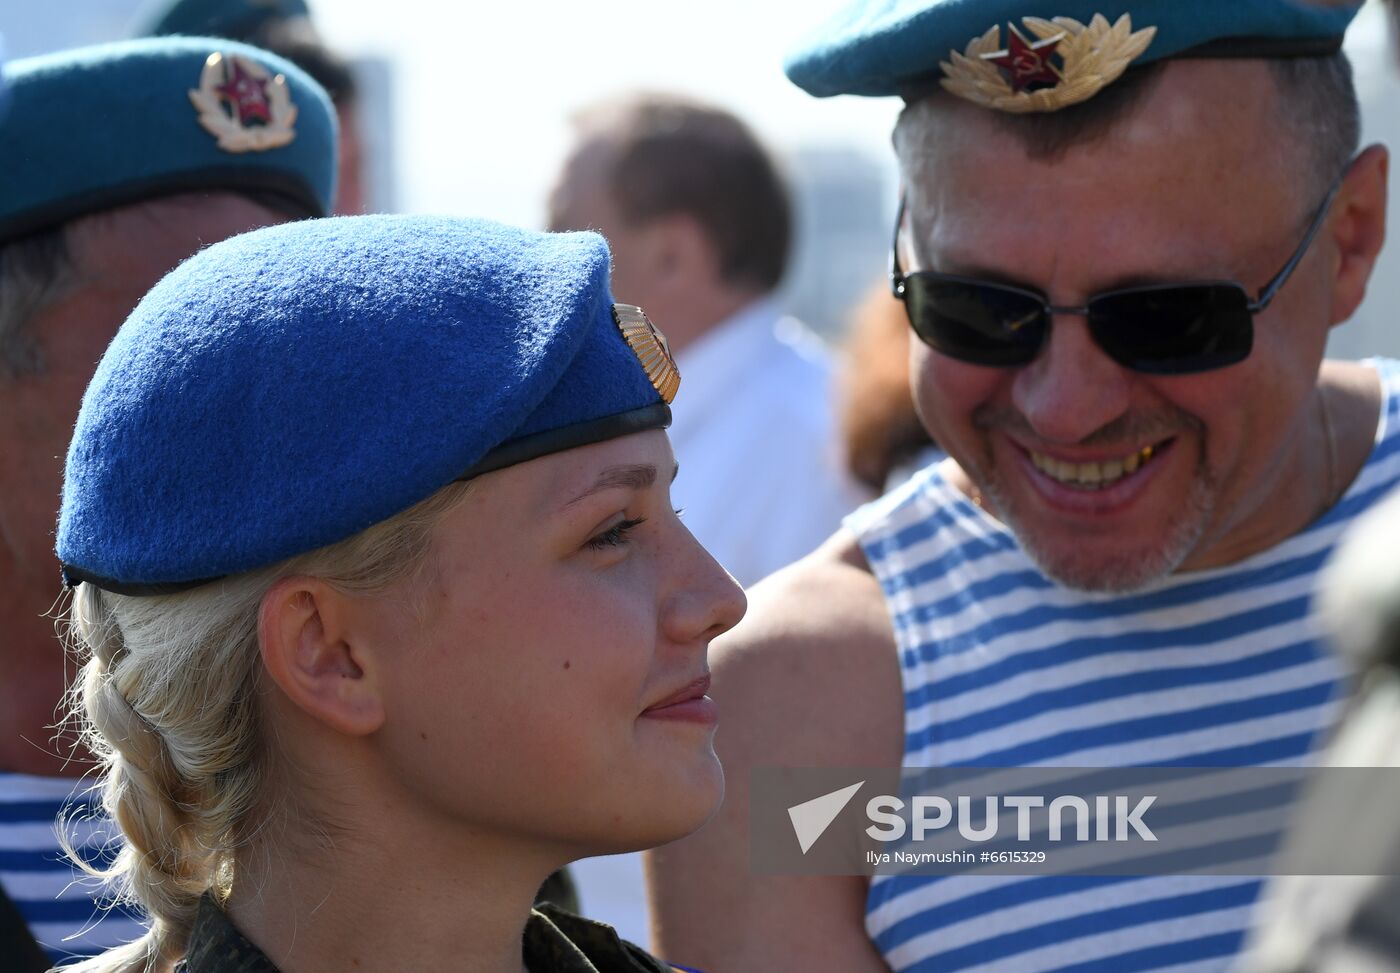 Russia Paratroopers' Day Celebration Regions